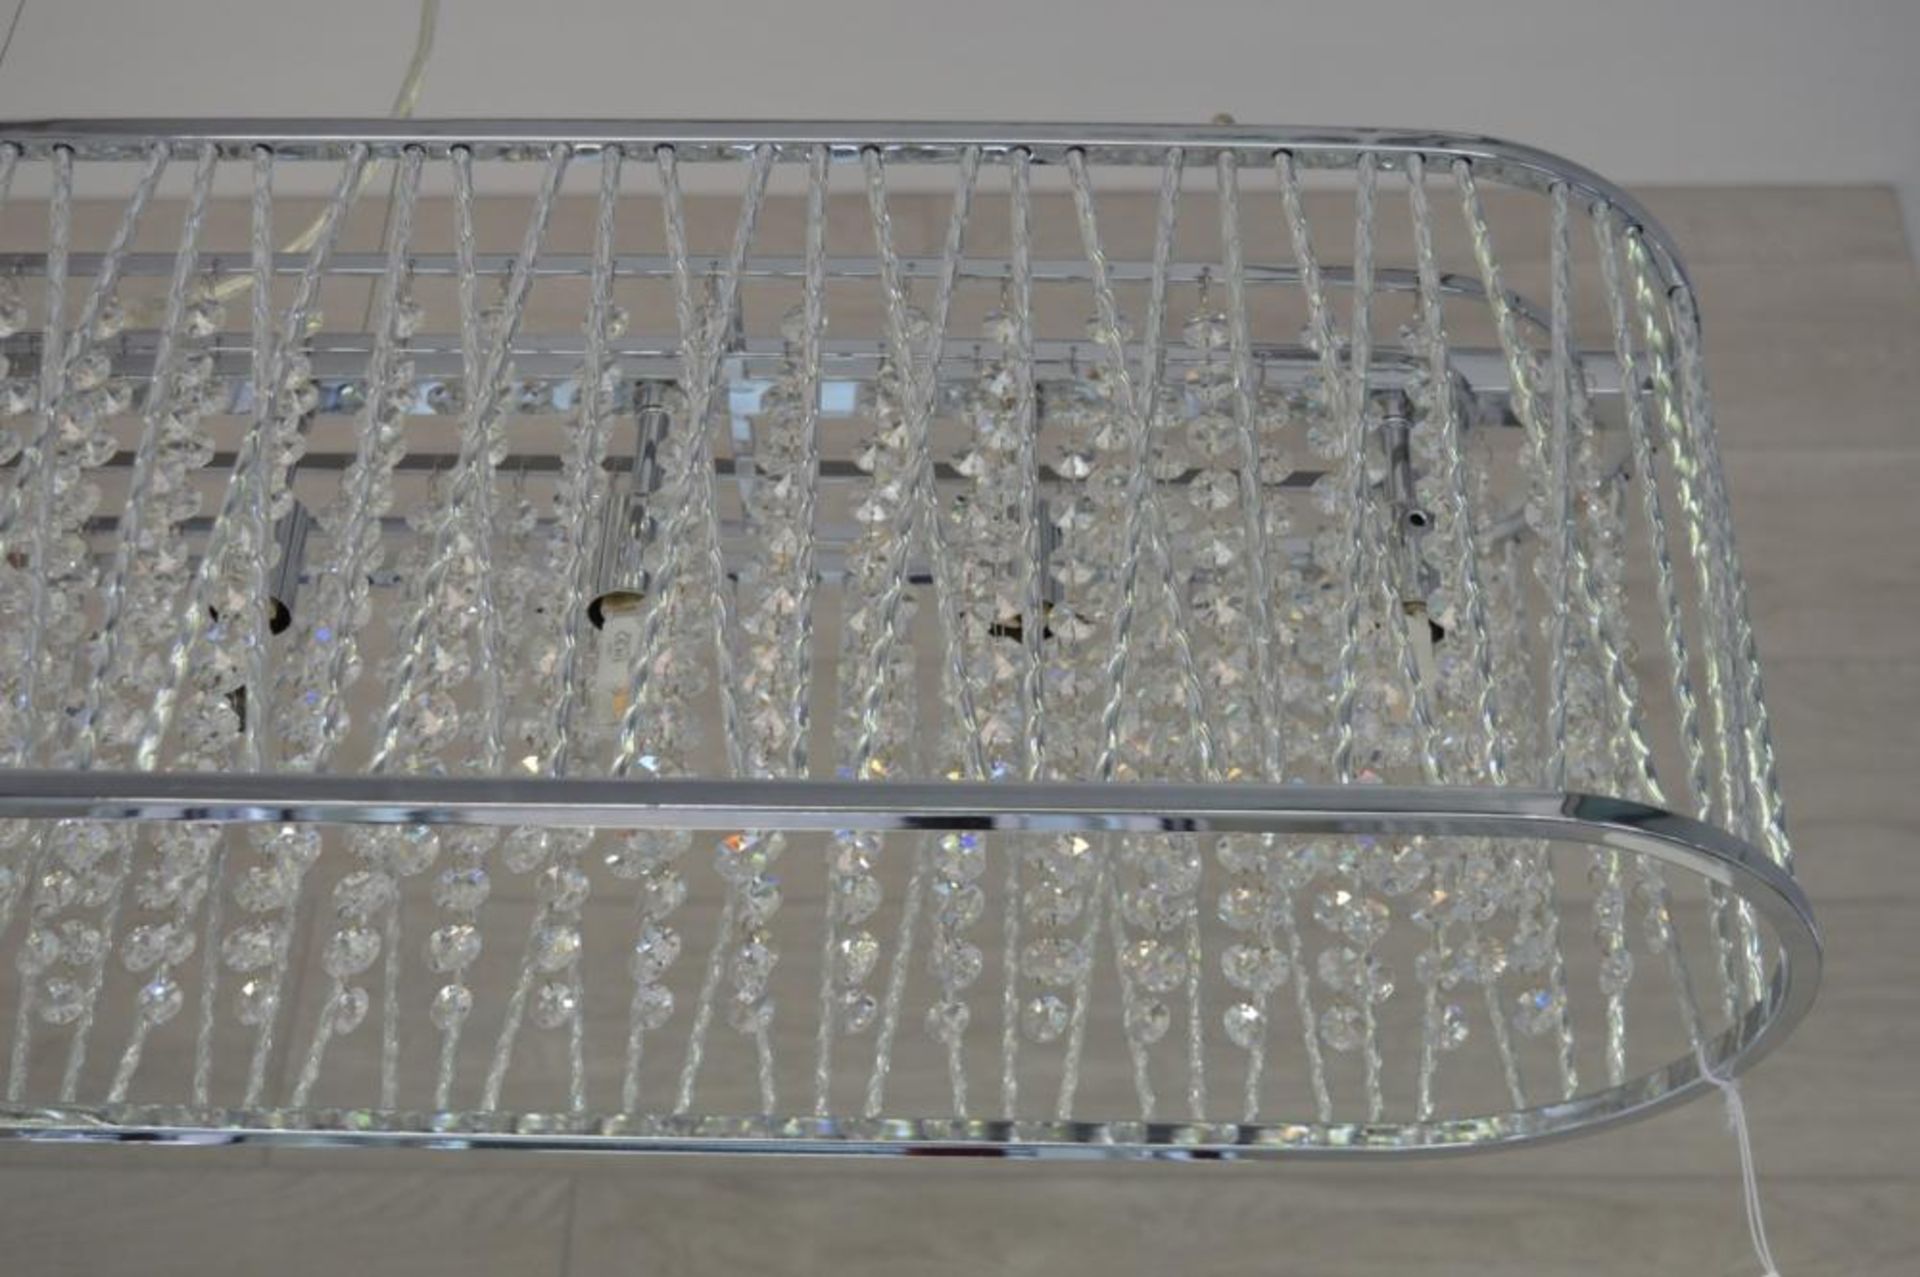 1 x Elise Chrome 8 Light Fitting With Crystal Button Drops - Ex Display Stock - CL298 - Ref J404 - L - Image 6 of 10